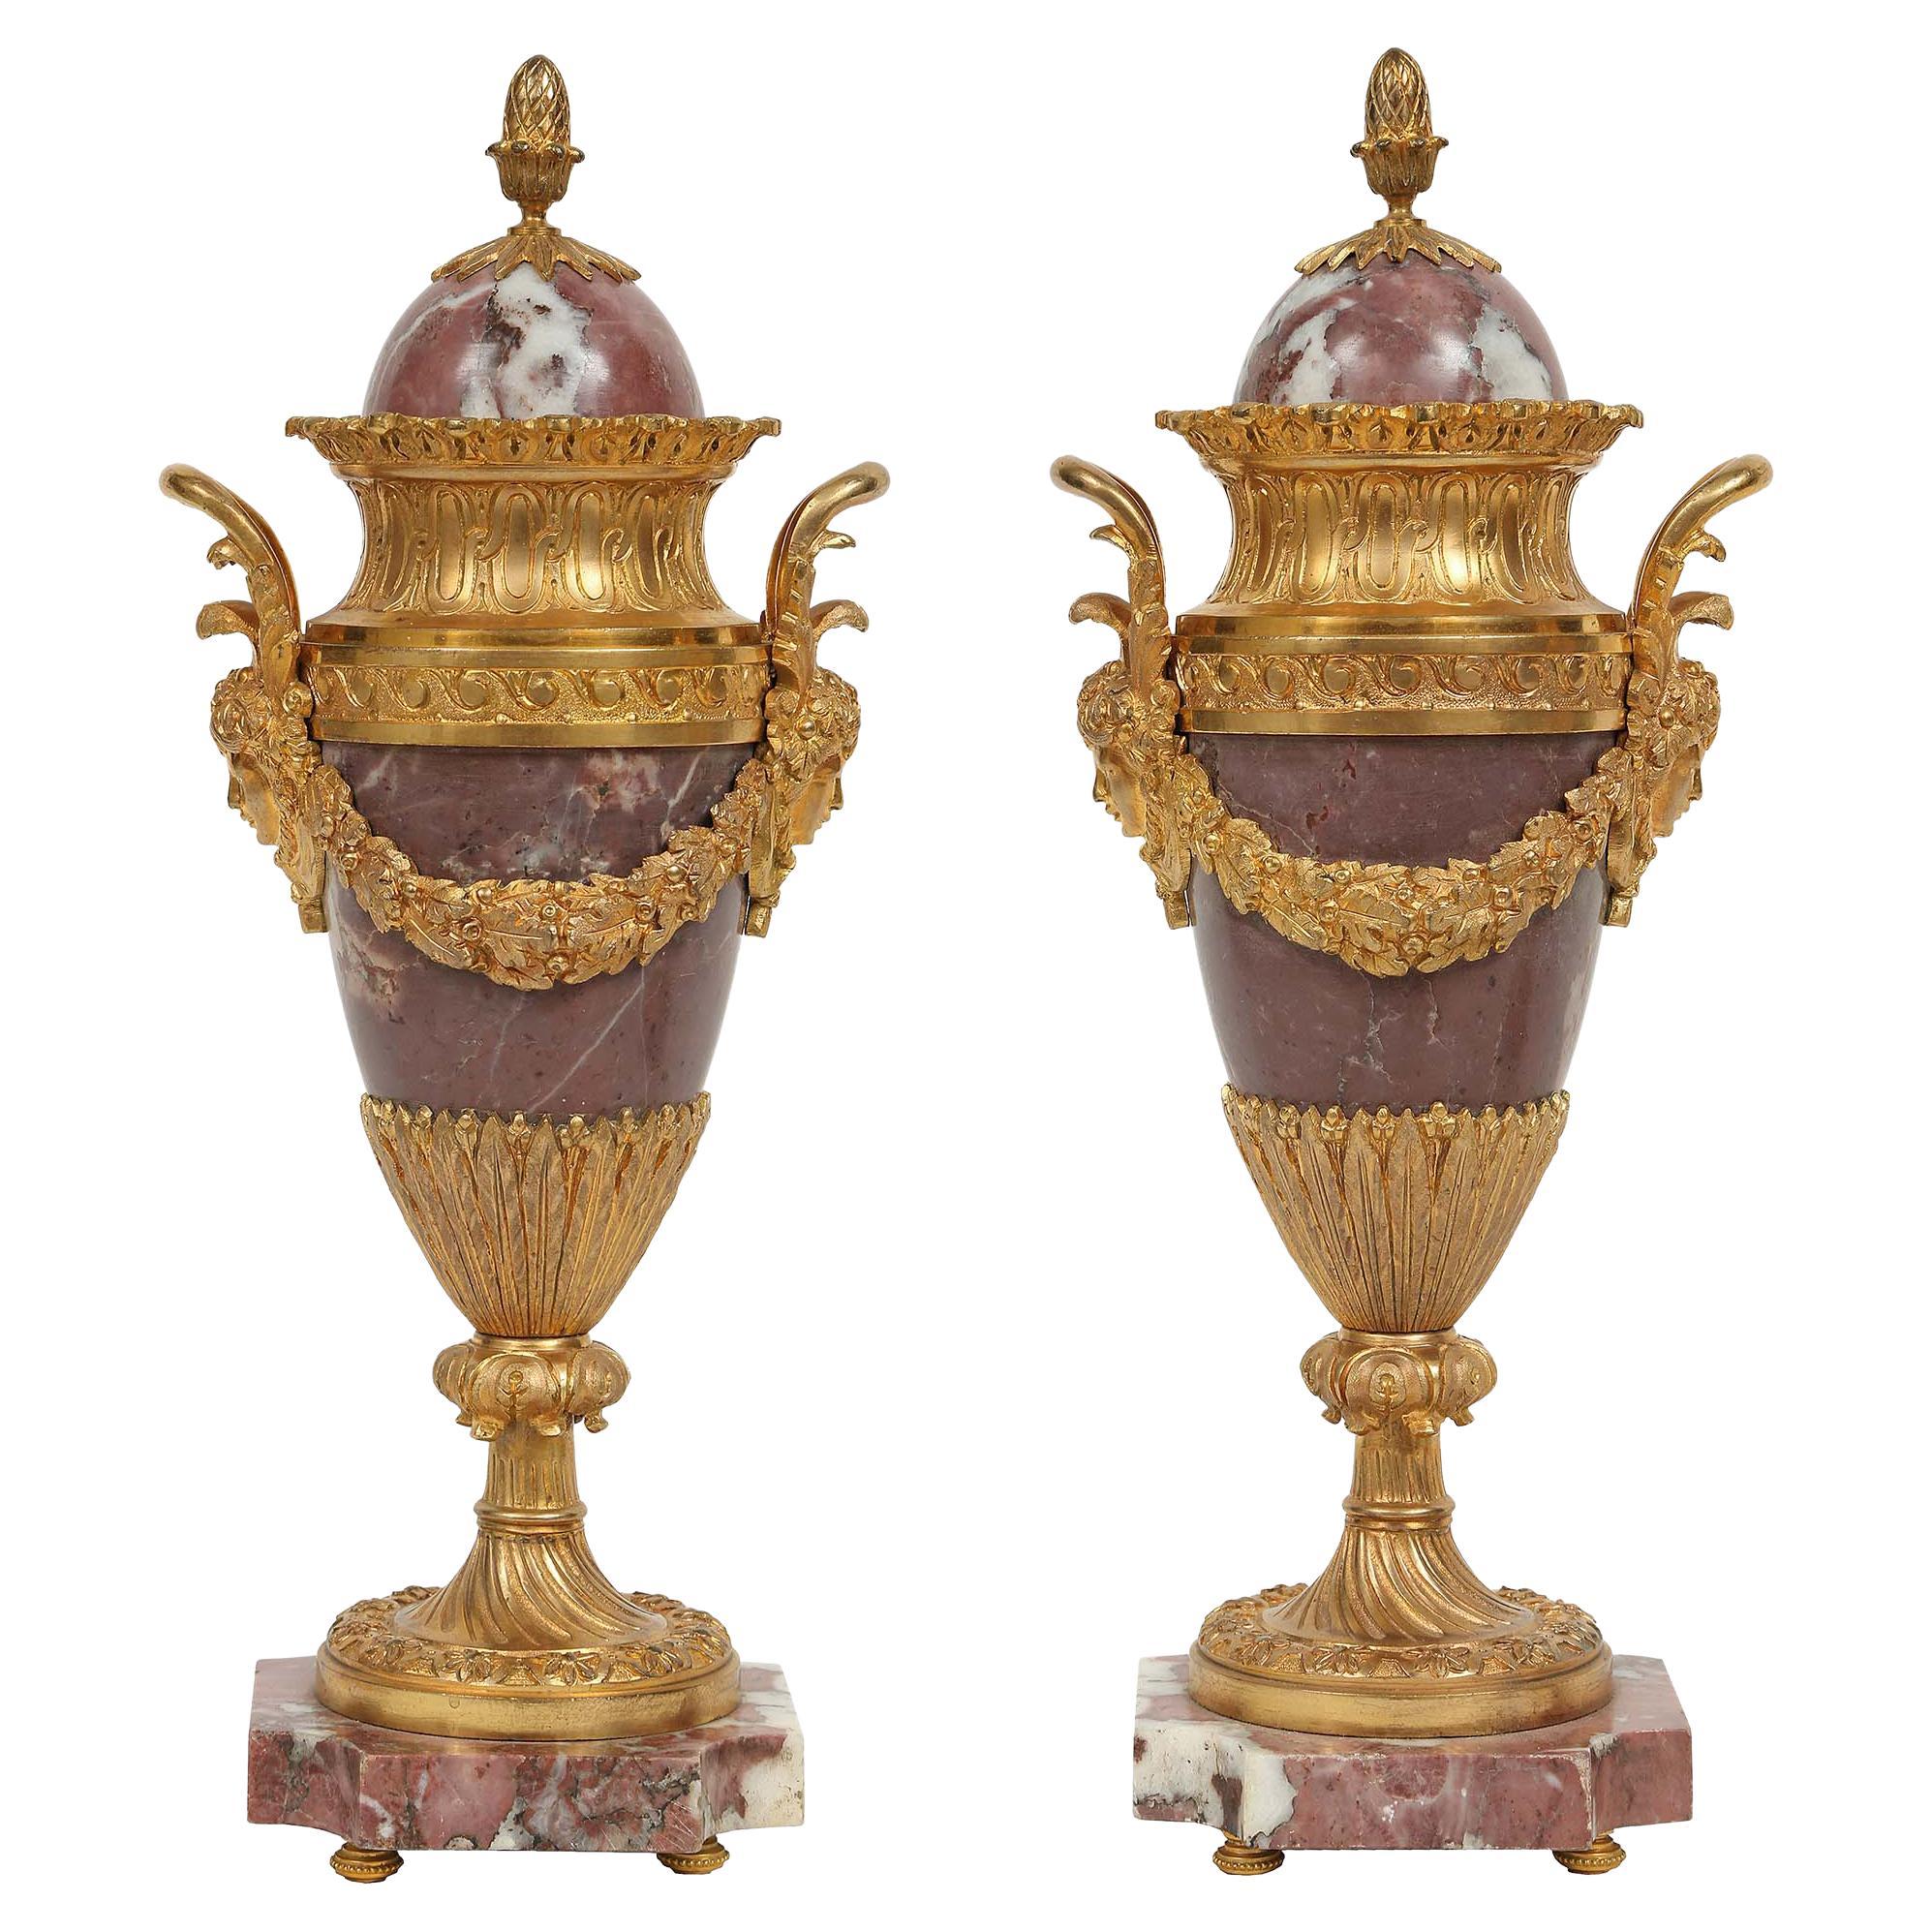 Pair of French Mid-19th Century Louis XVI Style Marble and Ormolu Cassolettes For Sale